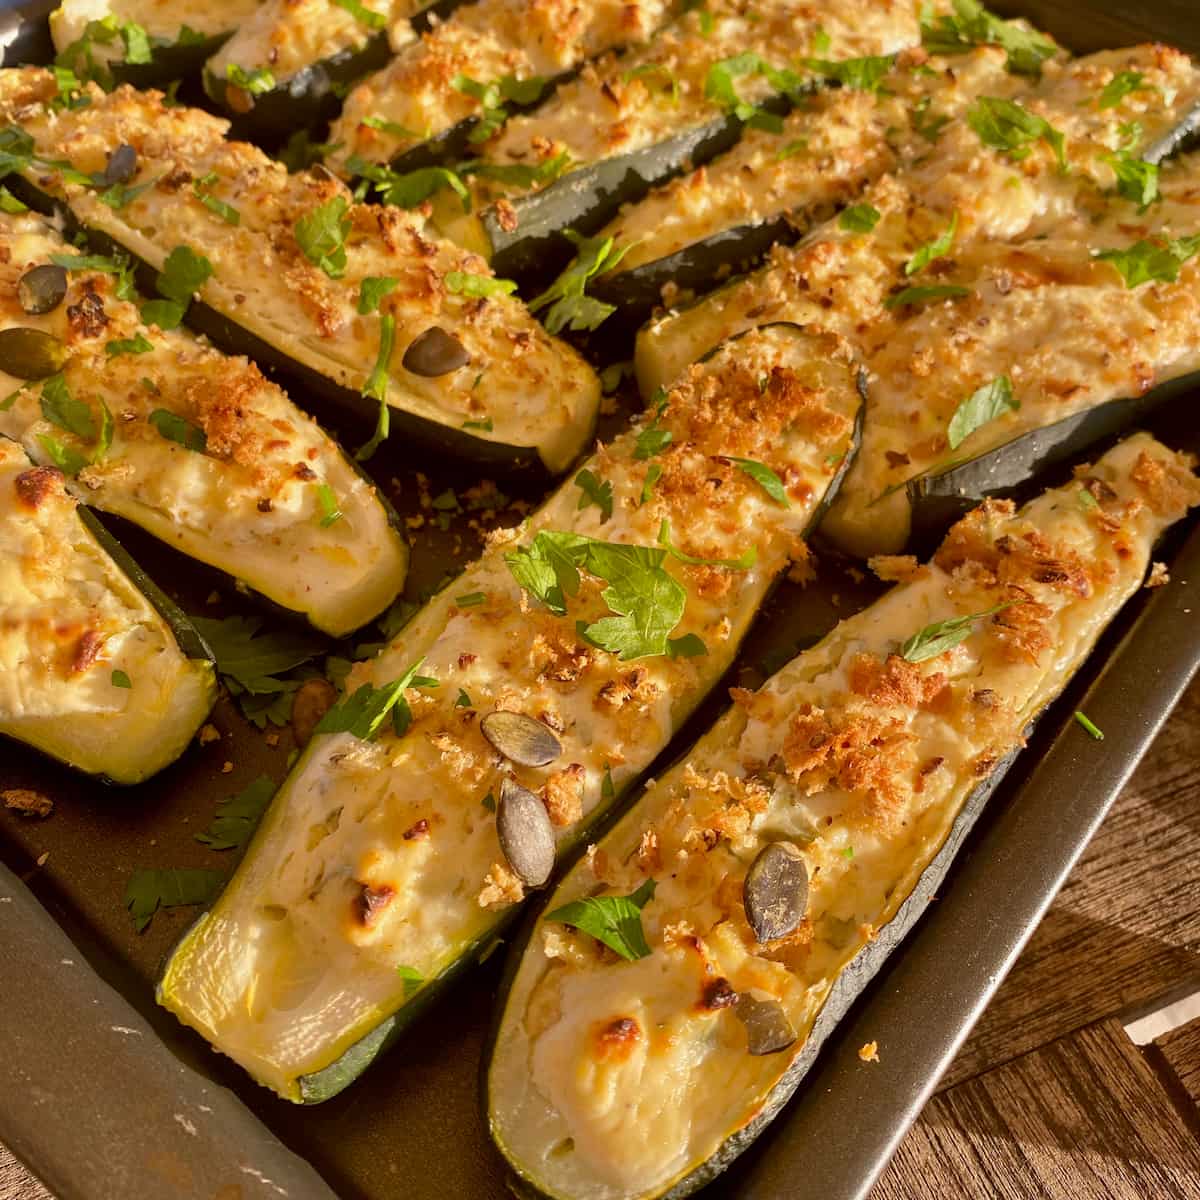 rows of zucchini boat halves topped with cheese, breadcrumbs, seeds and herbs